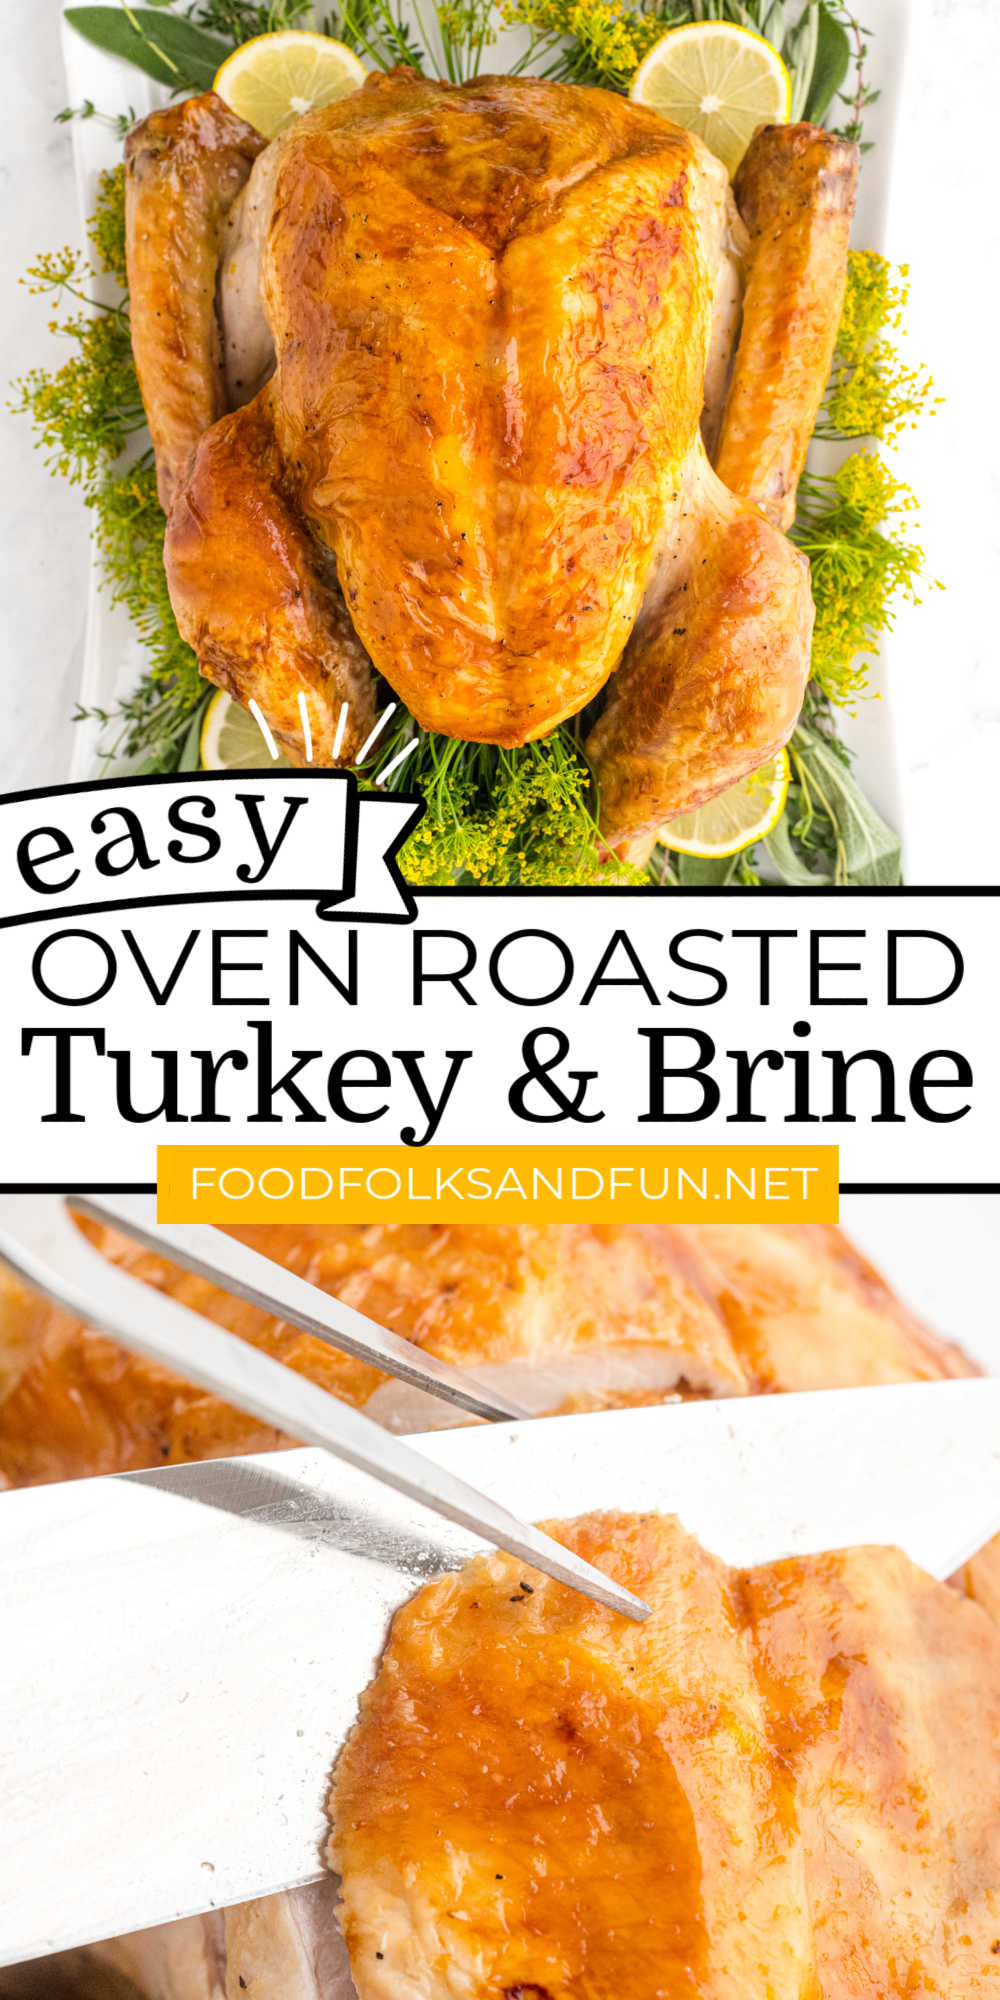 This Simple Turkey Brine recipe and Oven Roasted Turkey recipe is just what you need to make a perfect turkey for Thanksgiving, the holidays, or anytime! via @foodfolksandfun